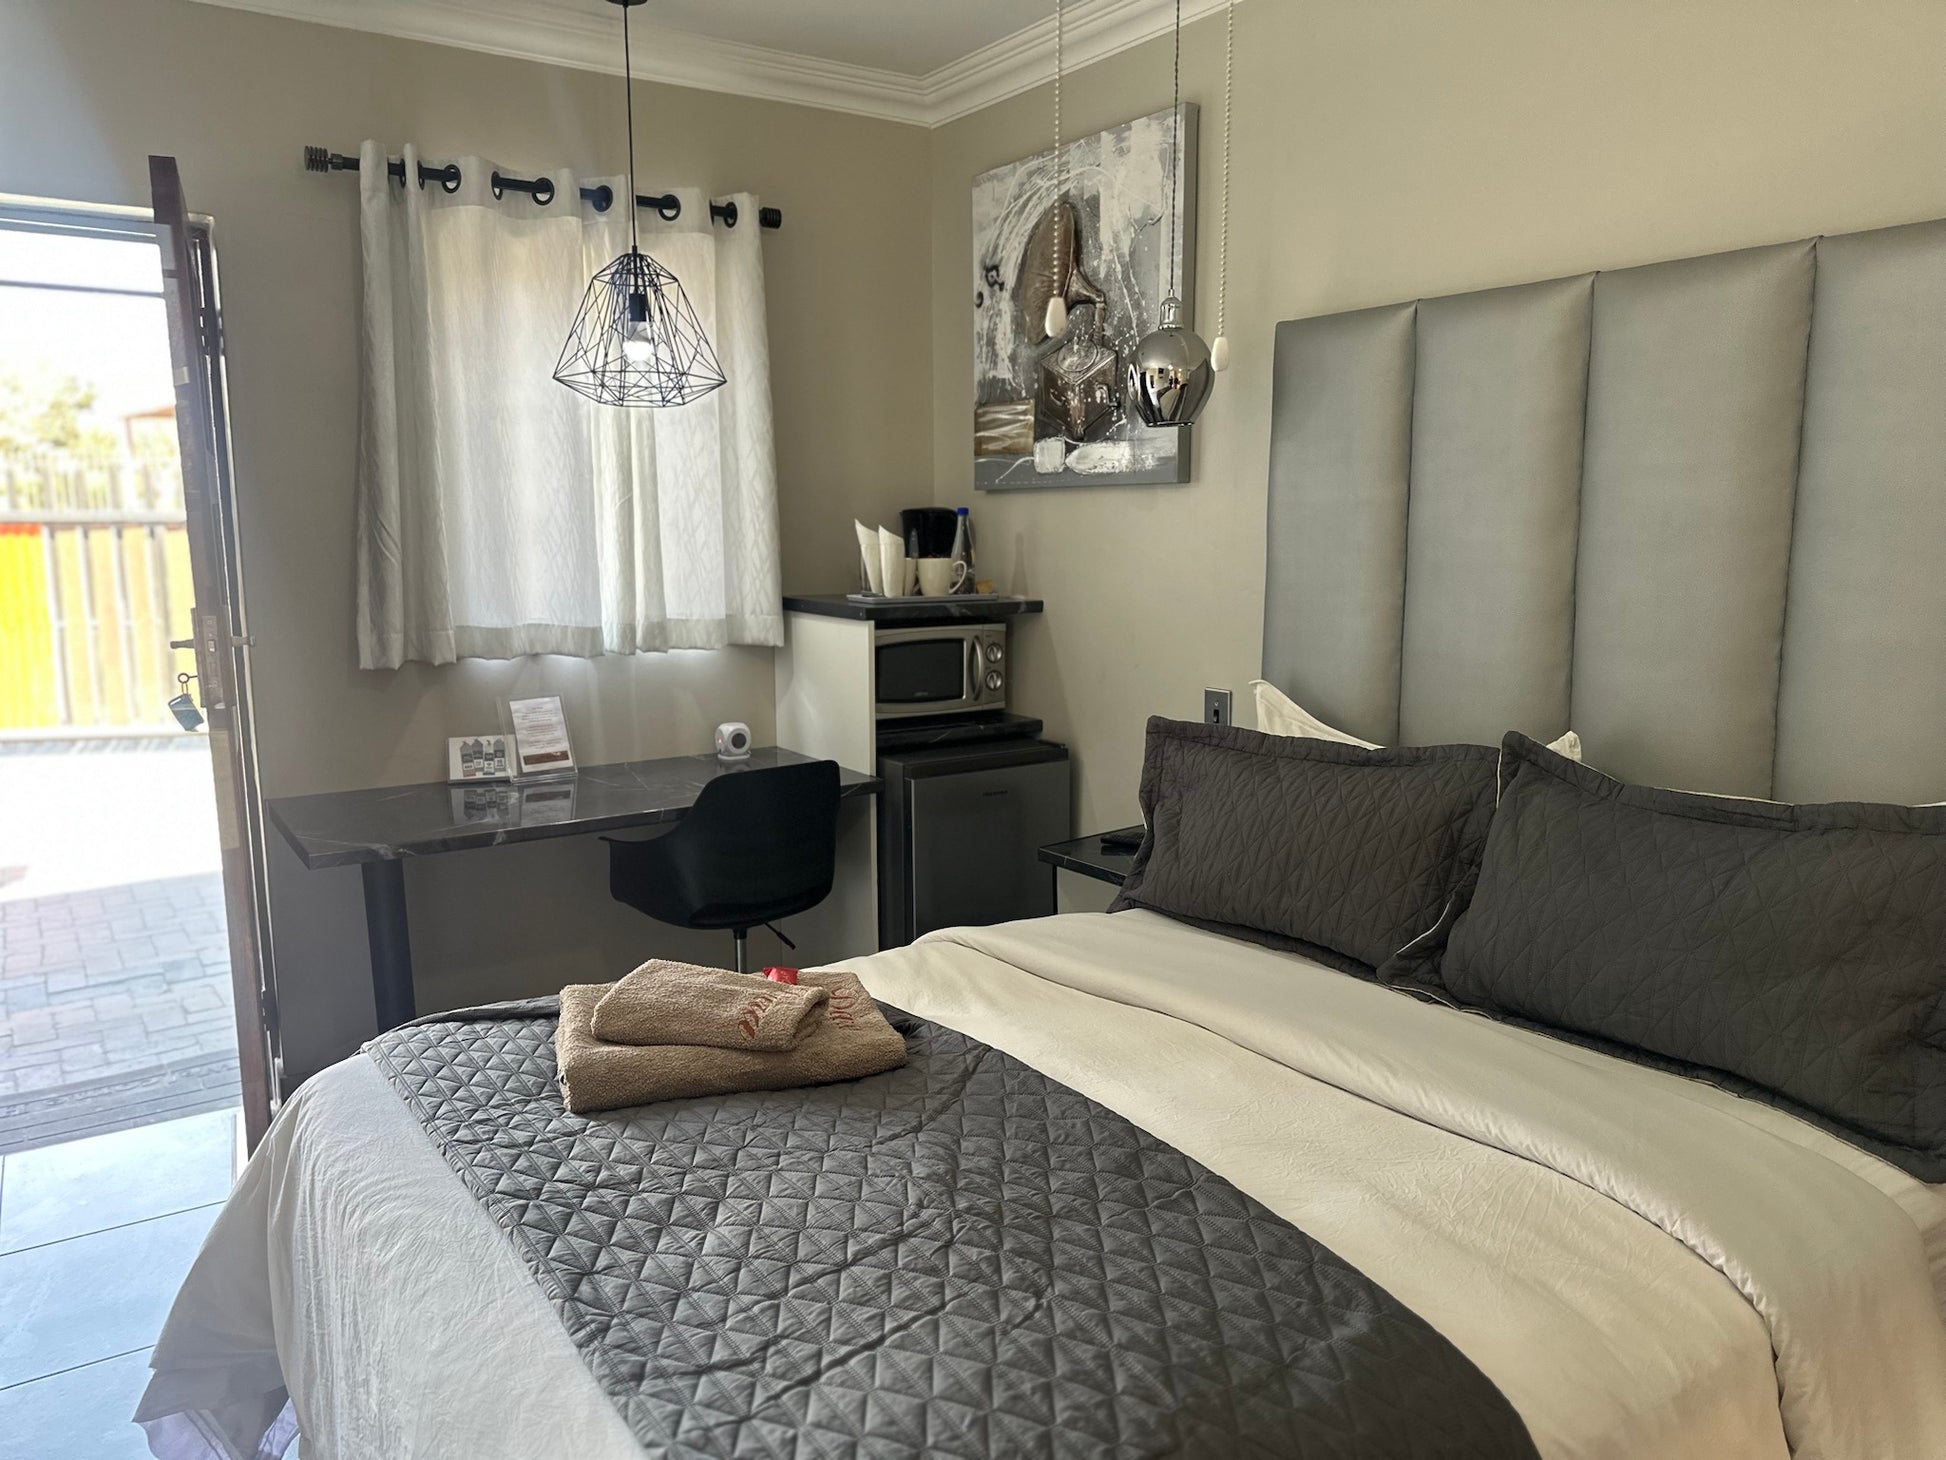 Dara Guest House Trichardt Secunda Mpumalanga South Africa Unsaturated, Bedroom